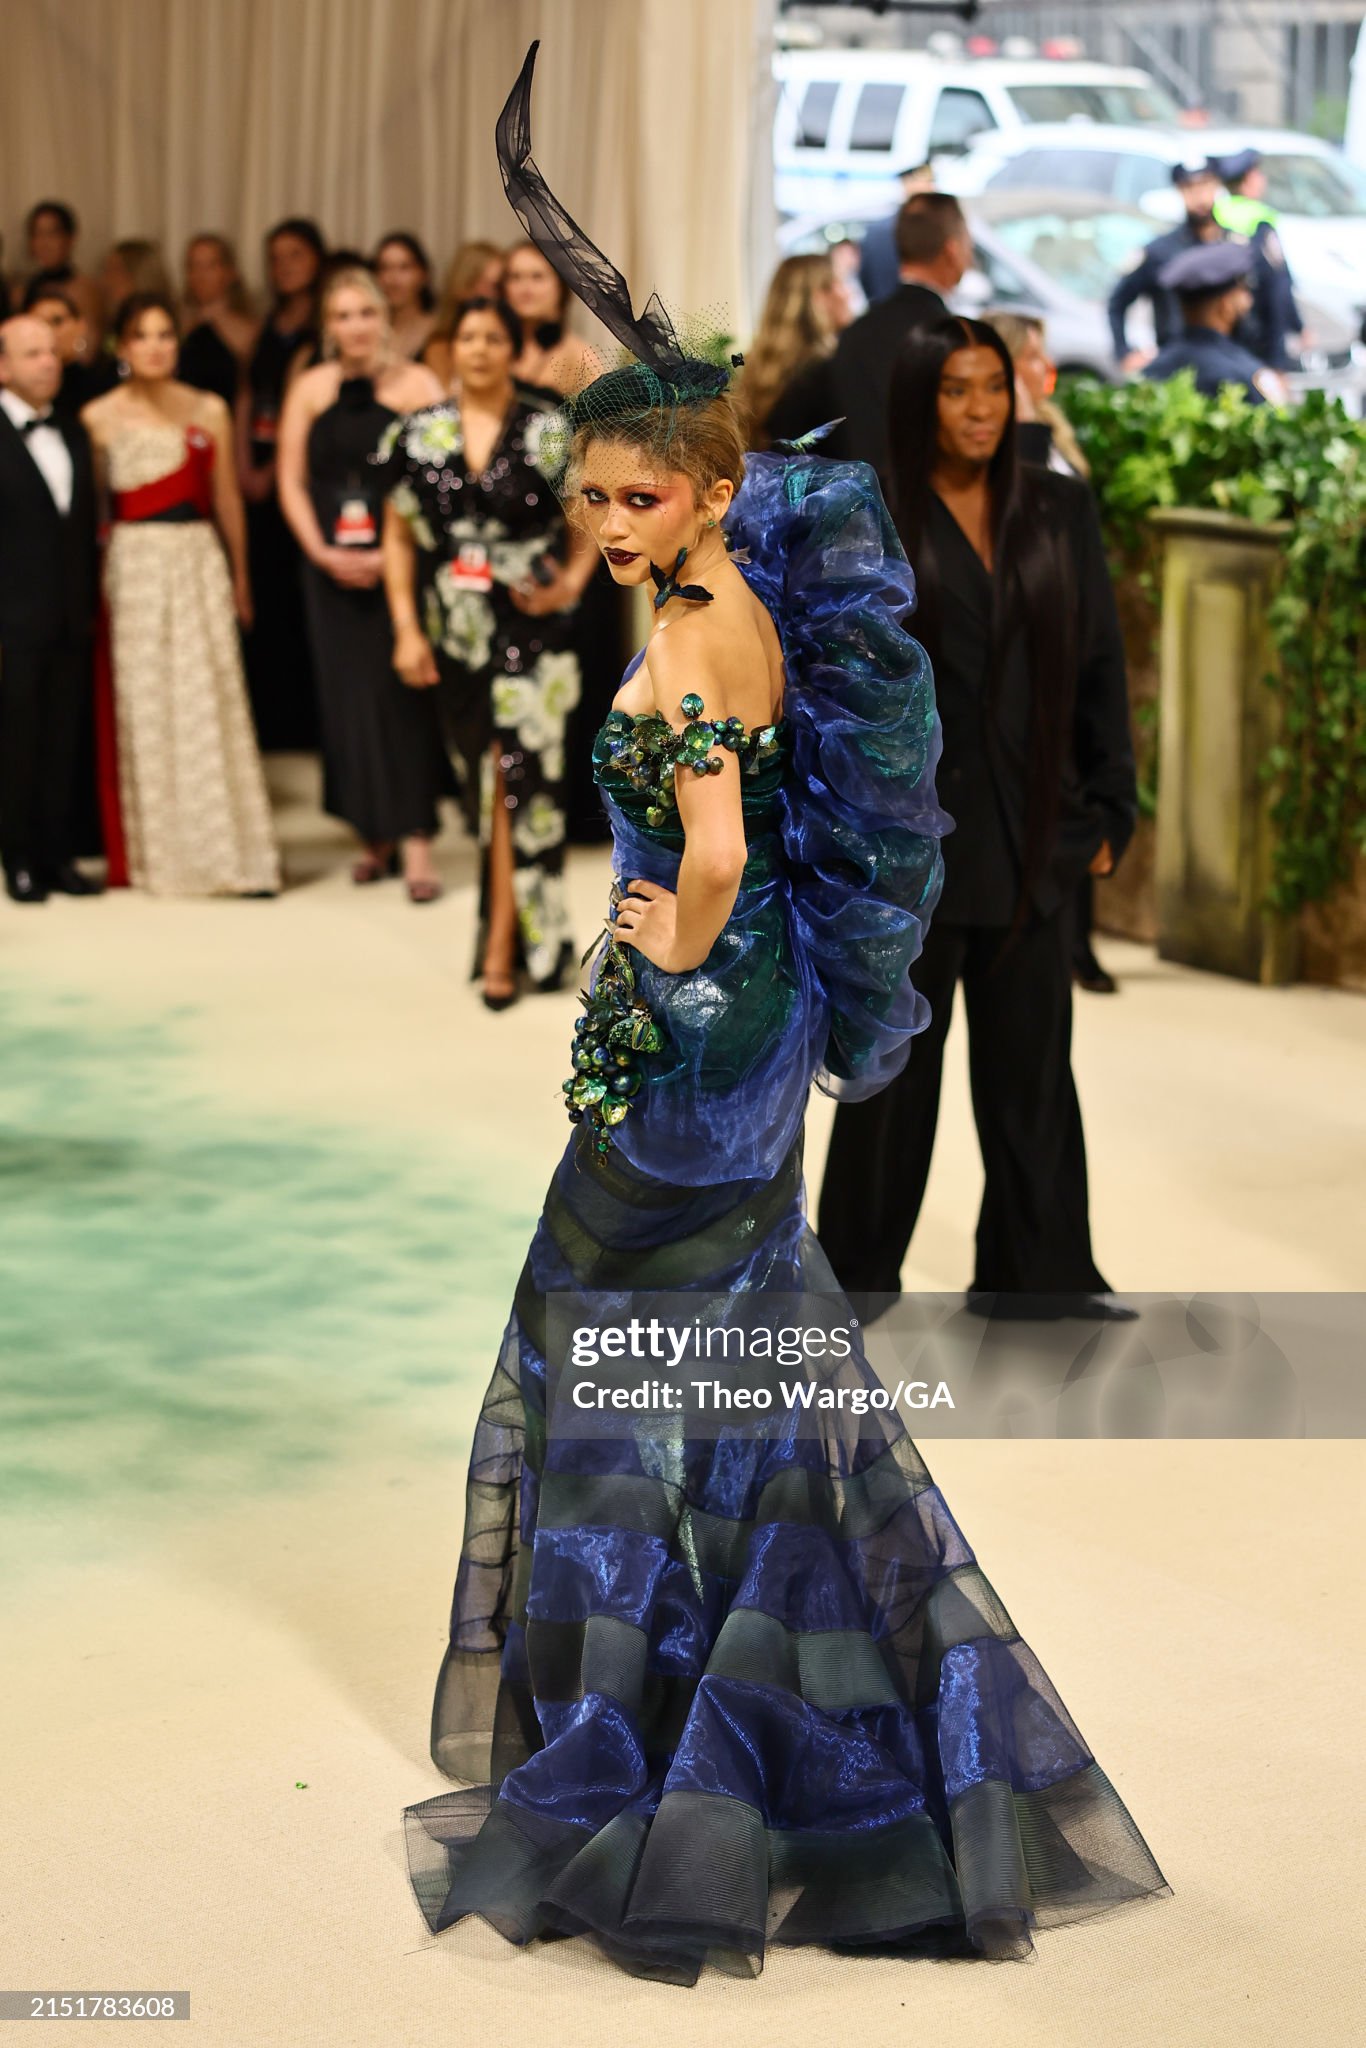 gettyimages-2151783608-2048x2048.jpg